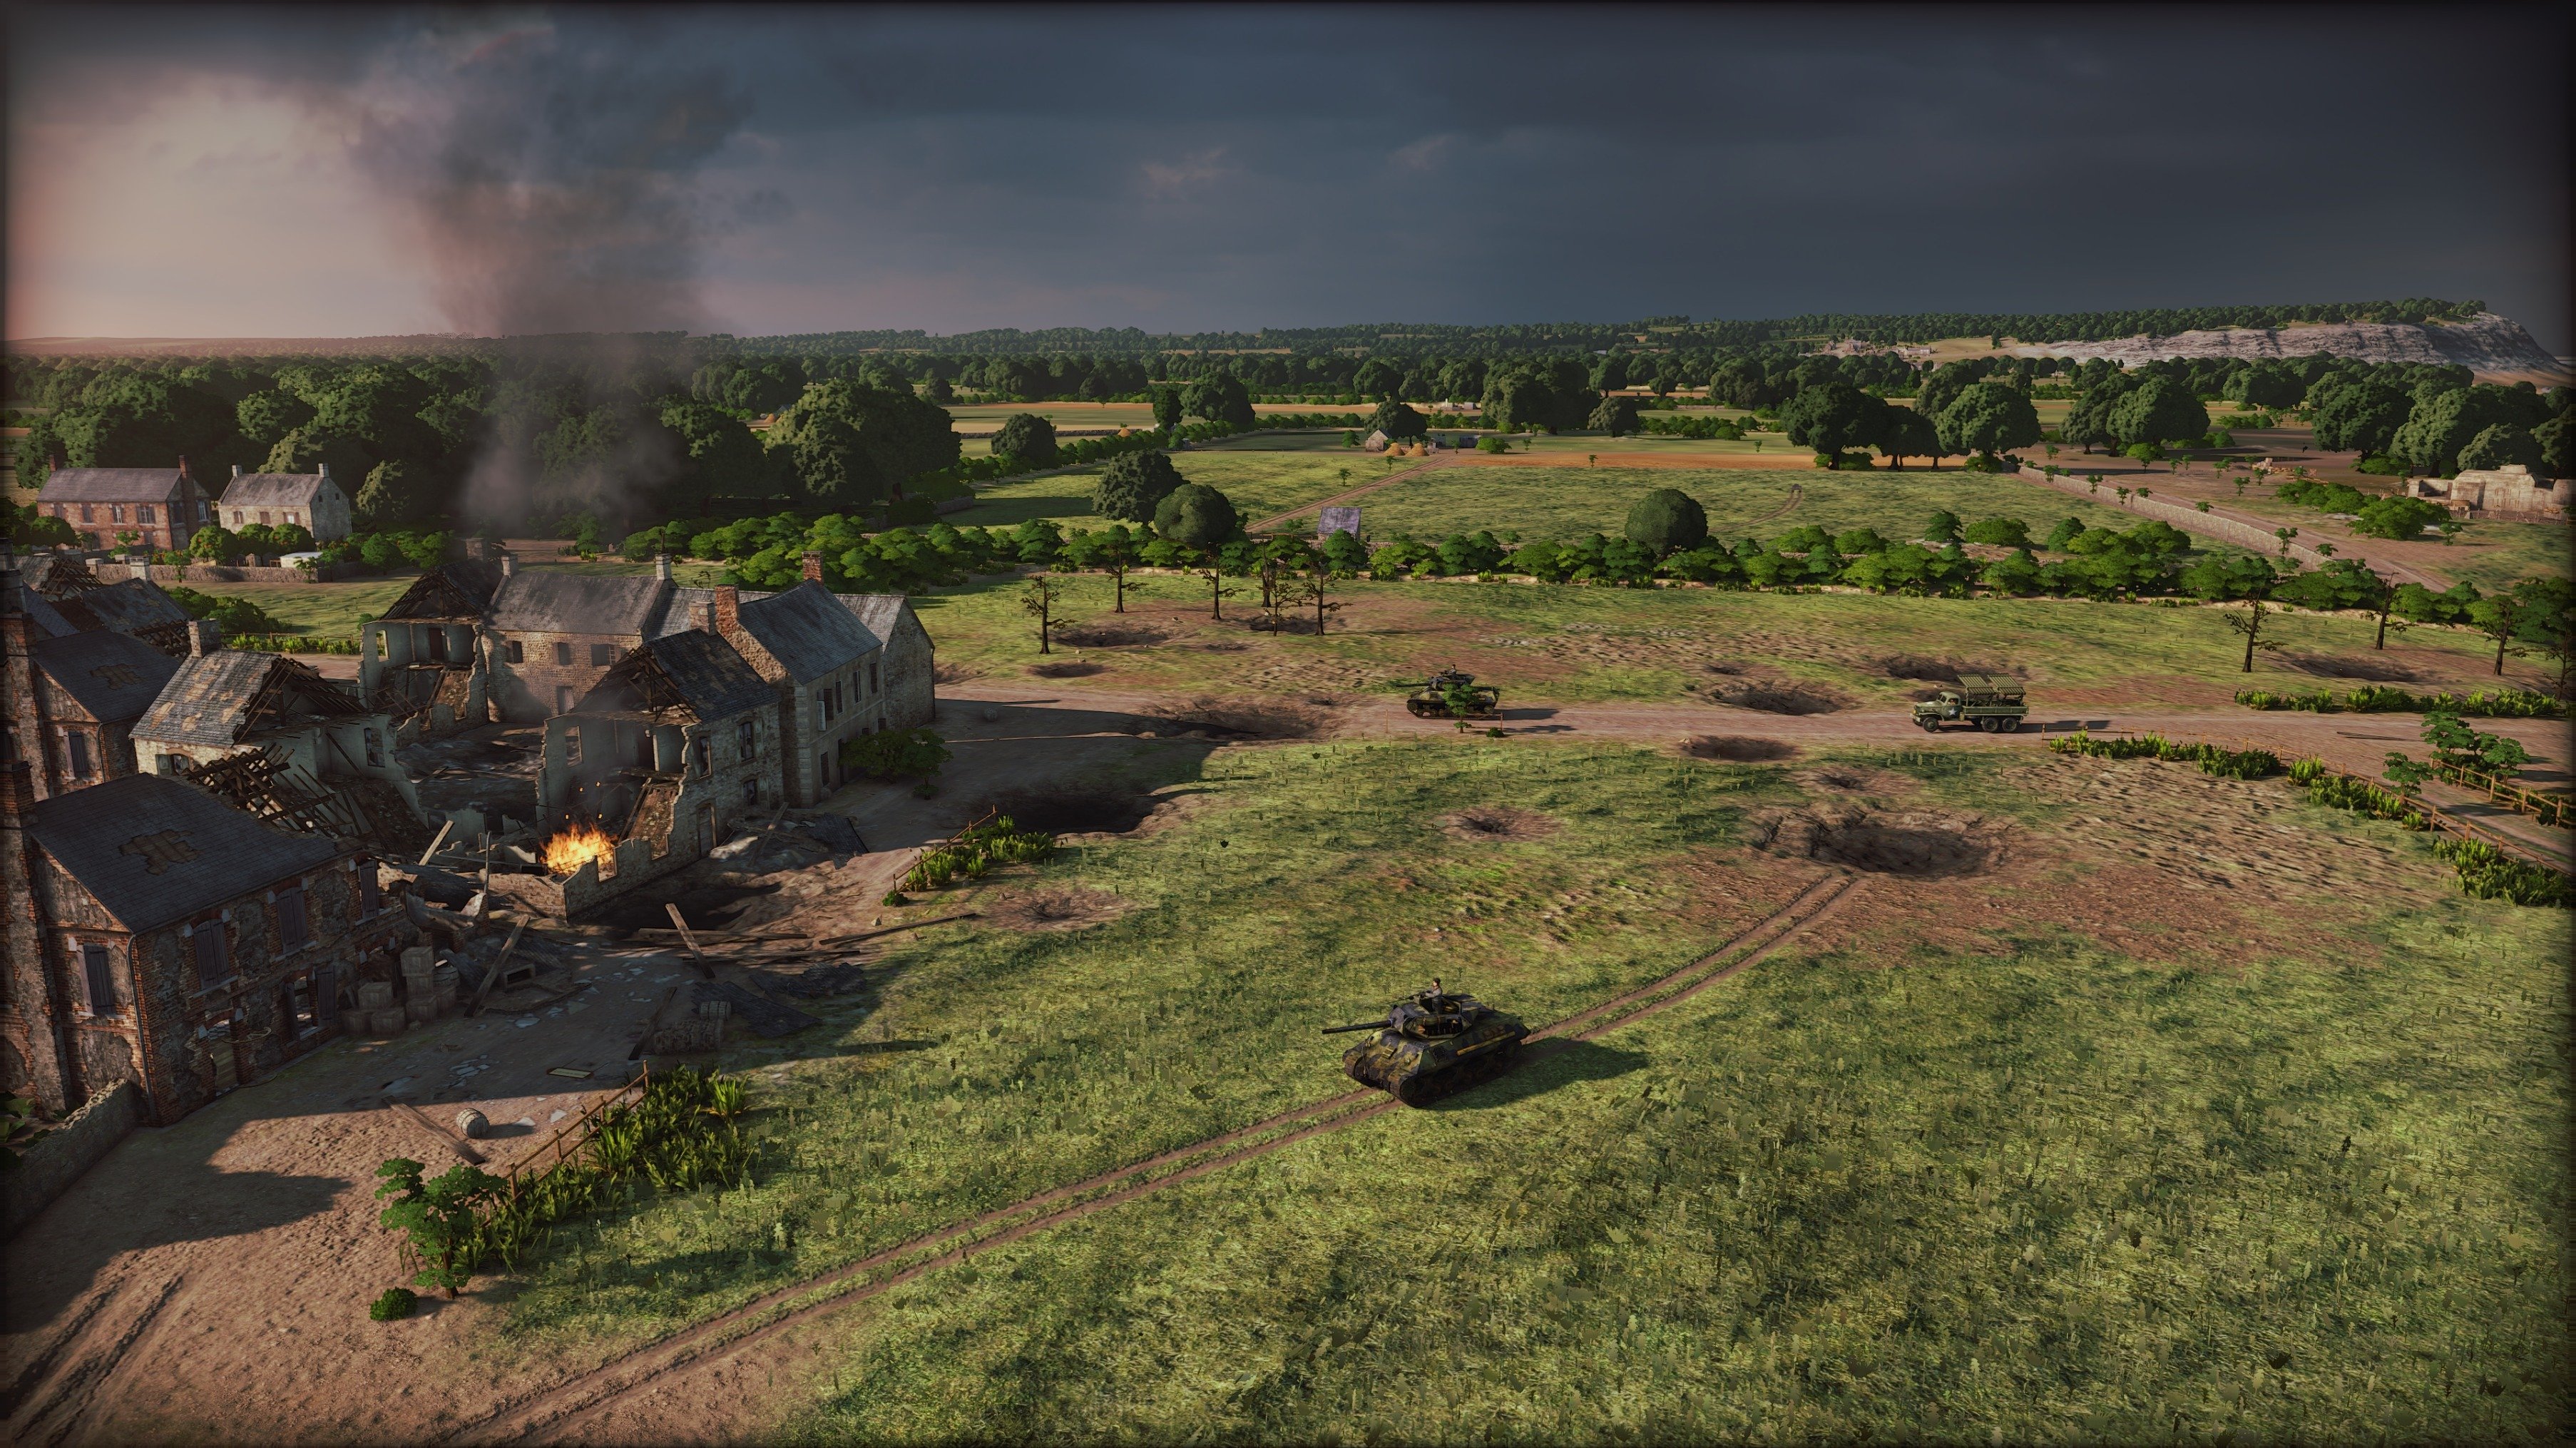 free download normandy 44 steel division